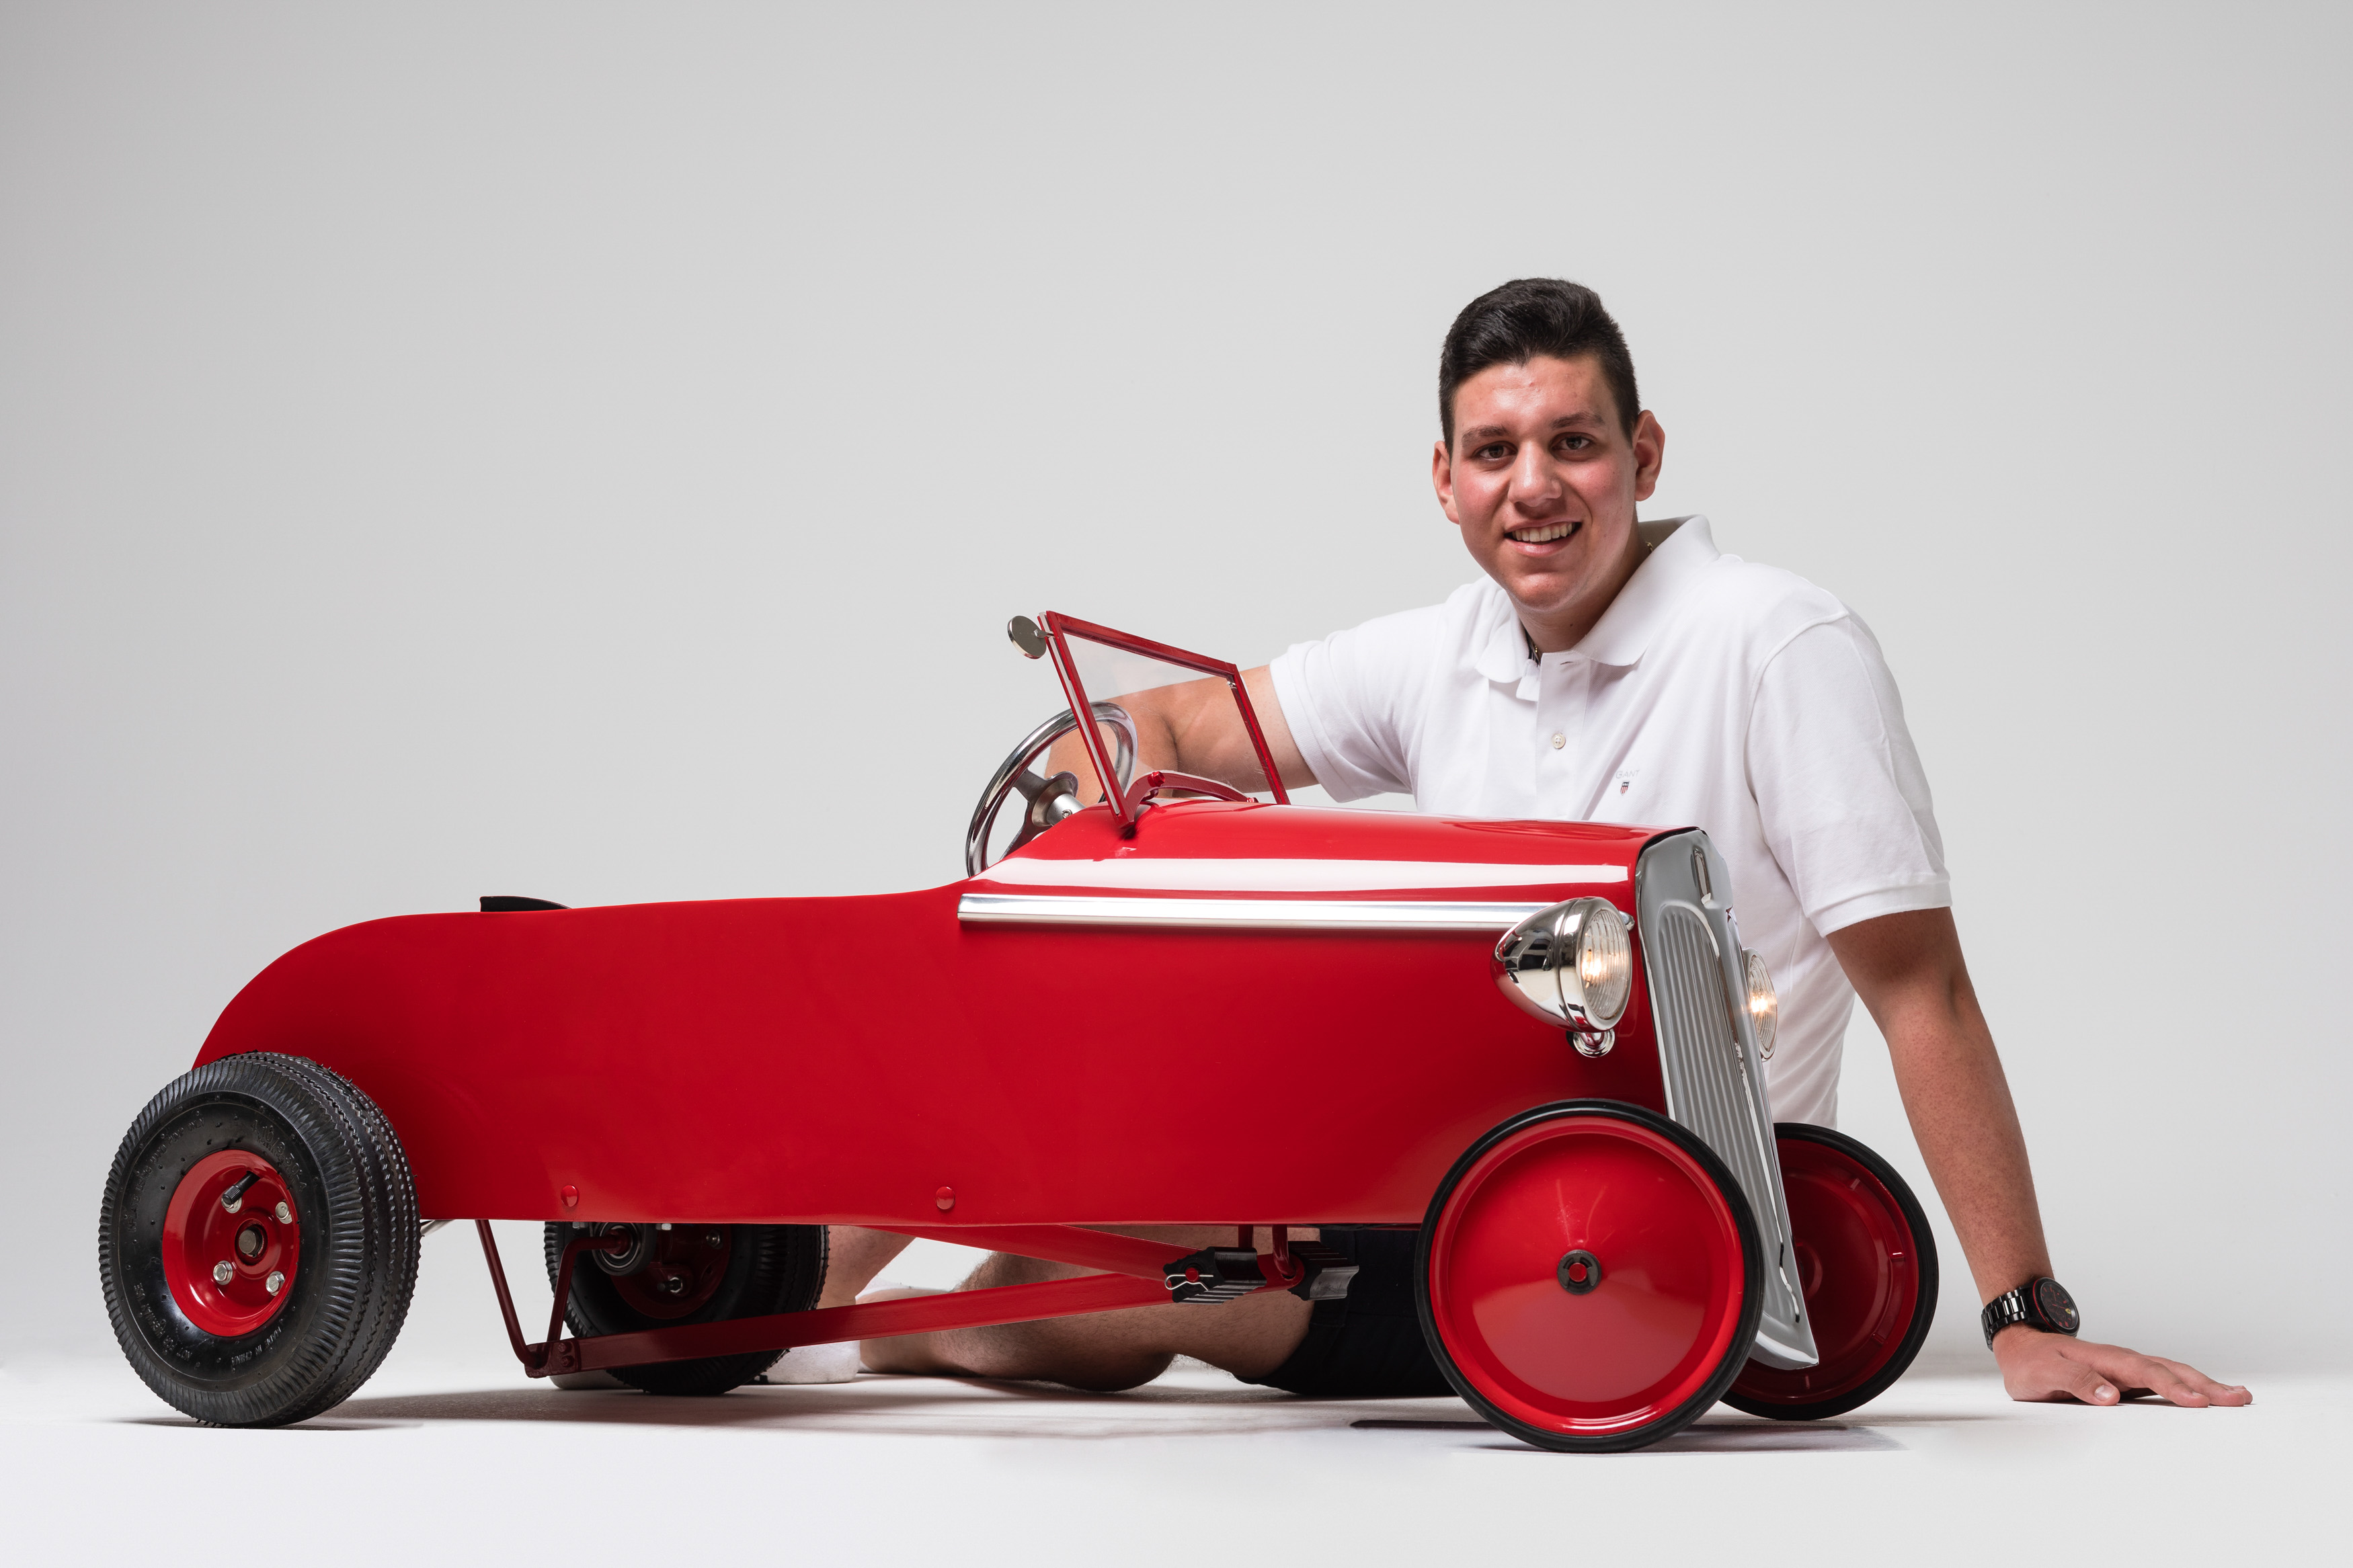 A young man sitting on the floor behind a small, bright red pedal car.